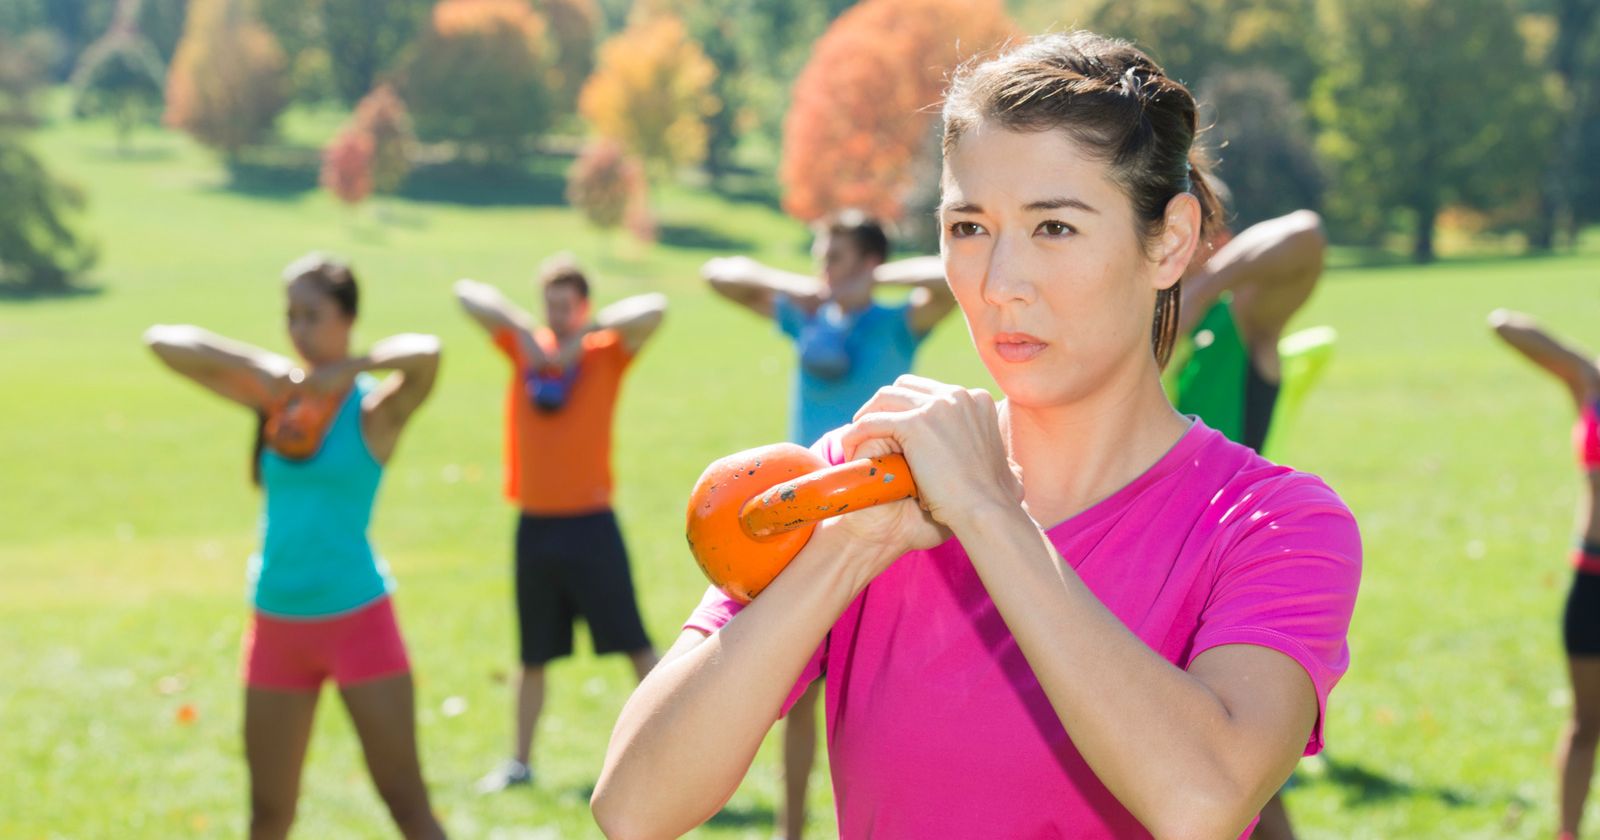 Simple full-body kettlebell workout to do at home